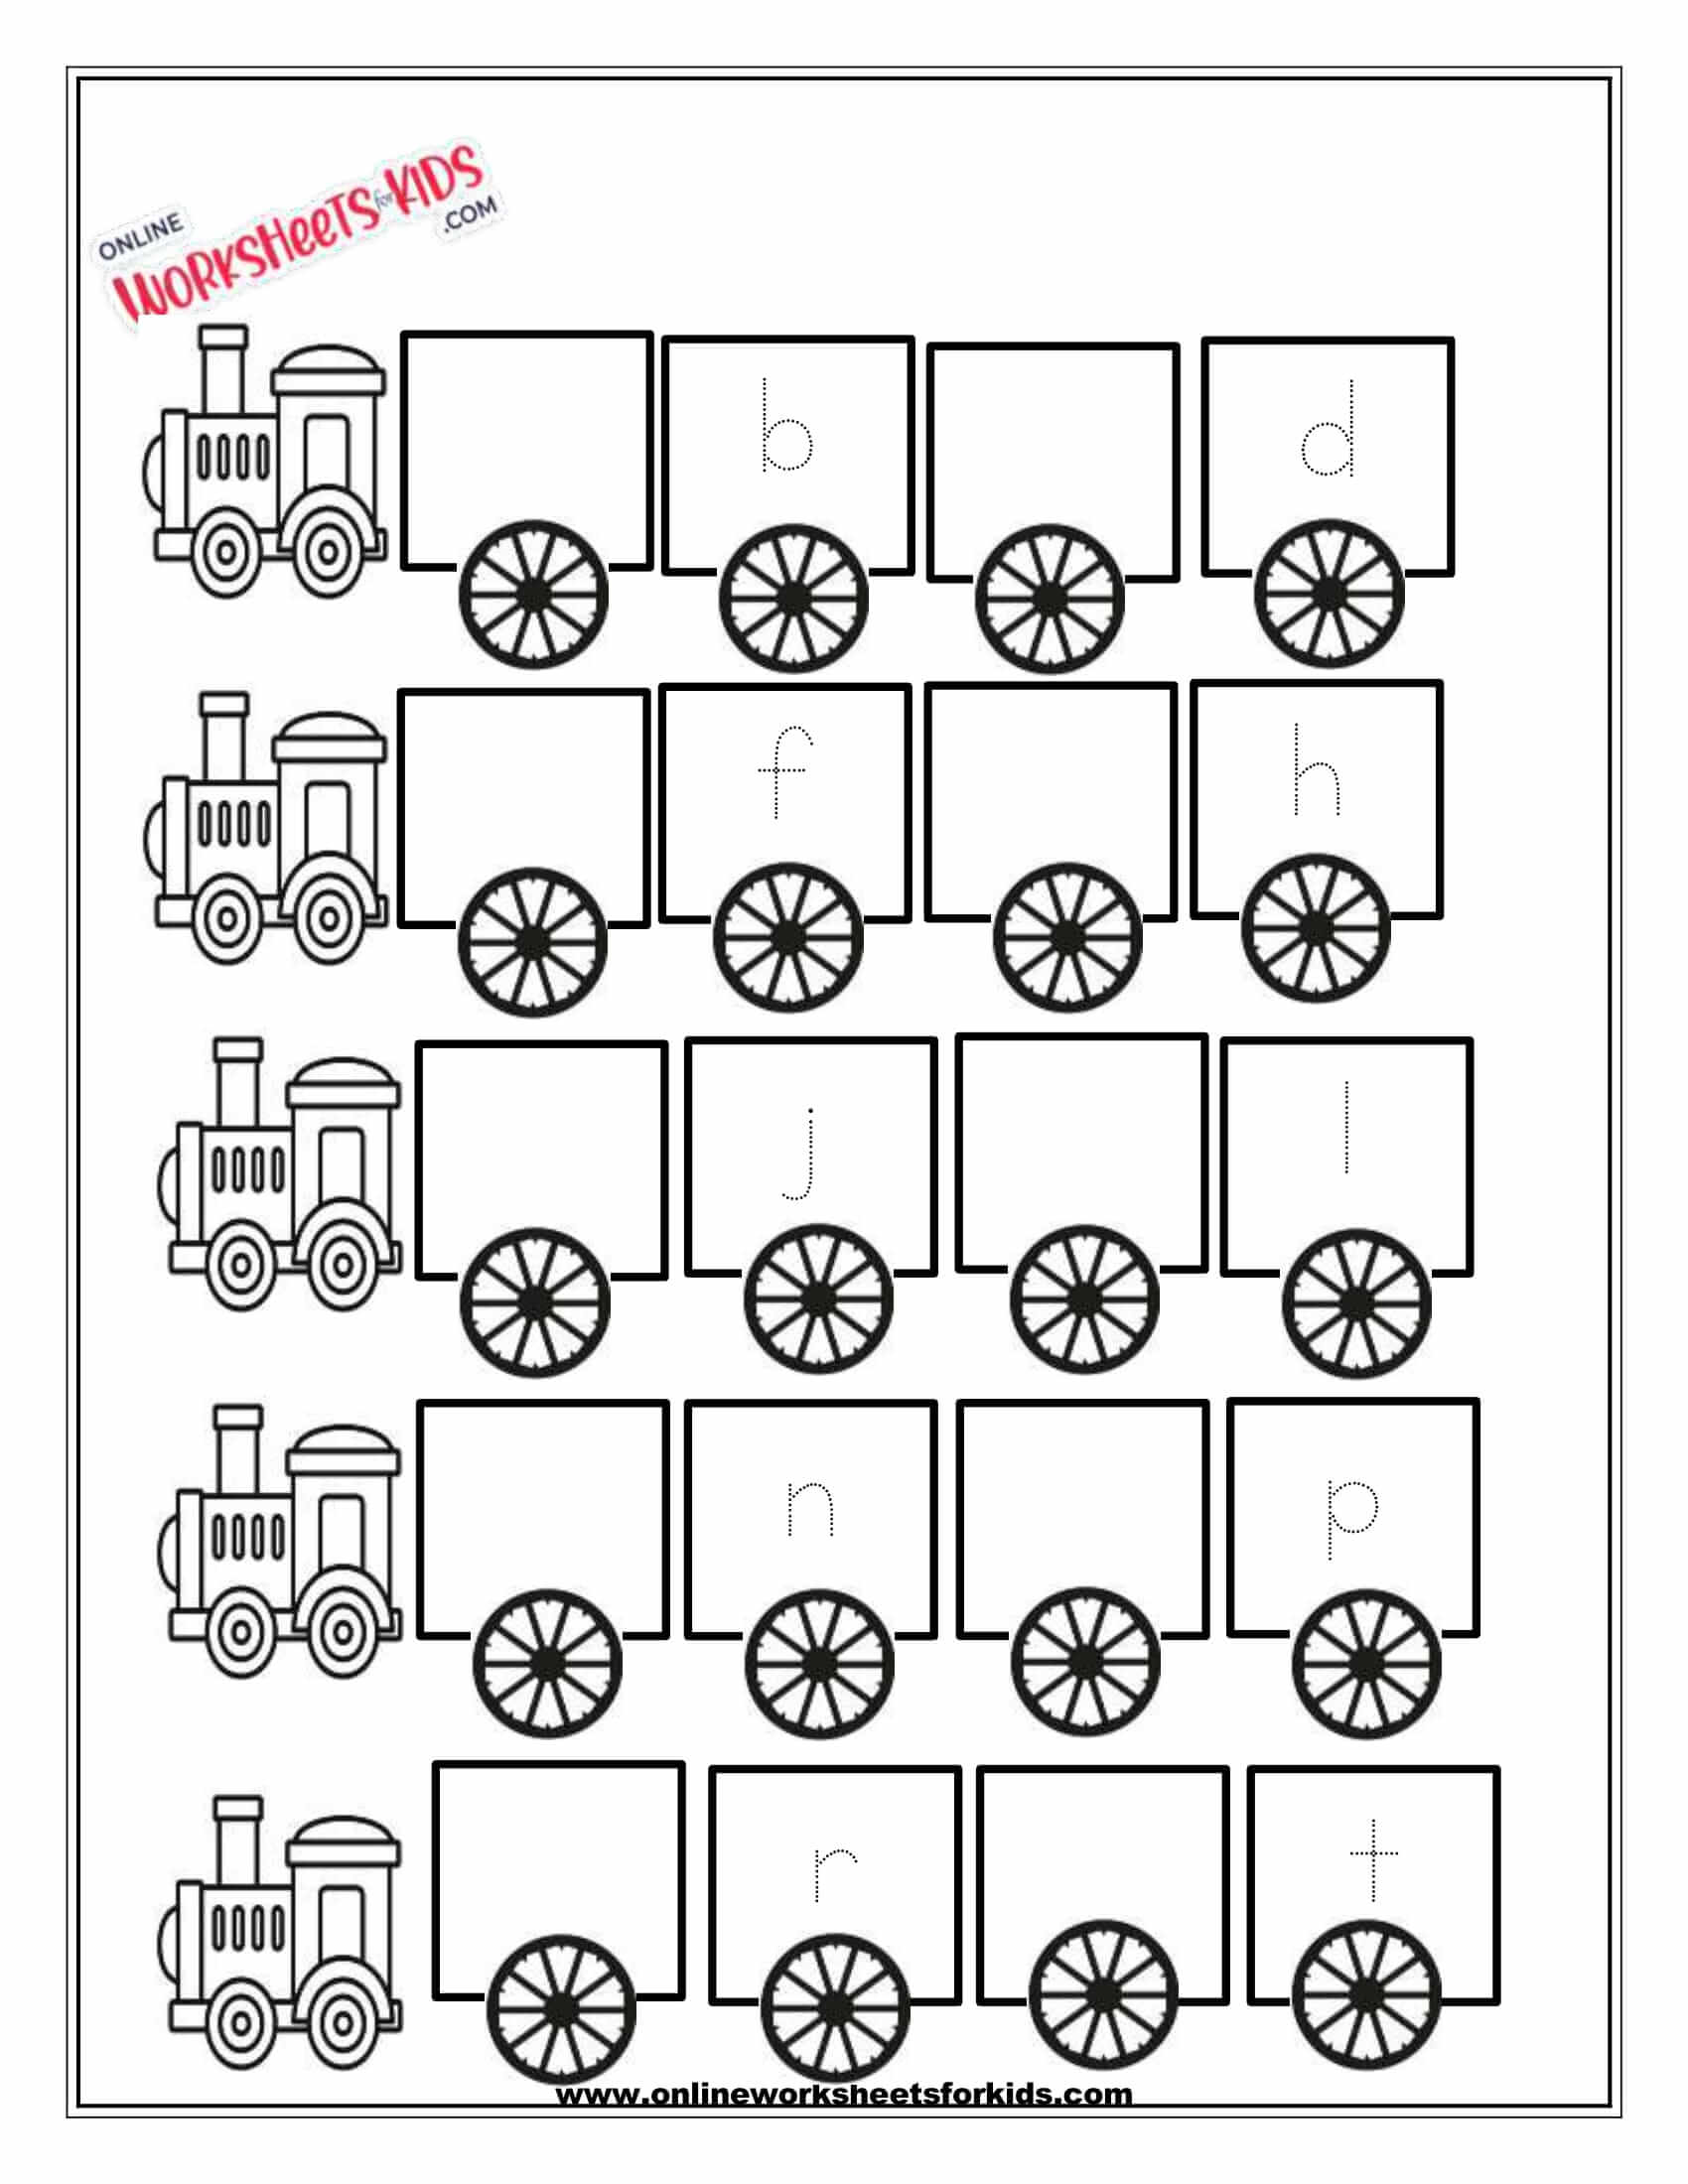 fill-in-the-missing-letter-a-z-worksheets-pack-printable-and-online-worksheets-pack-missing